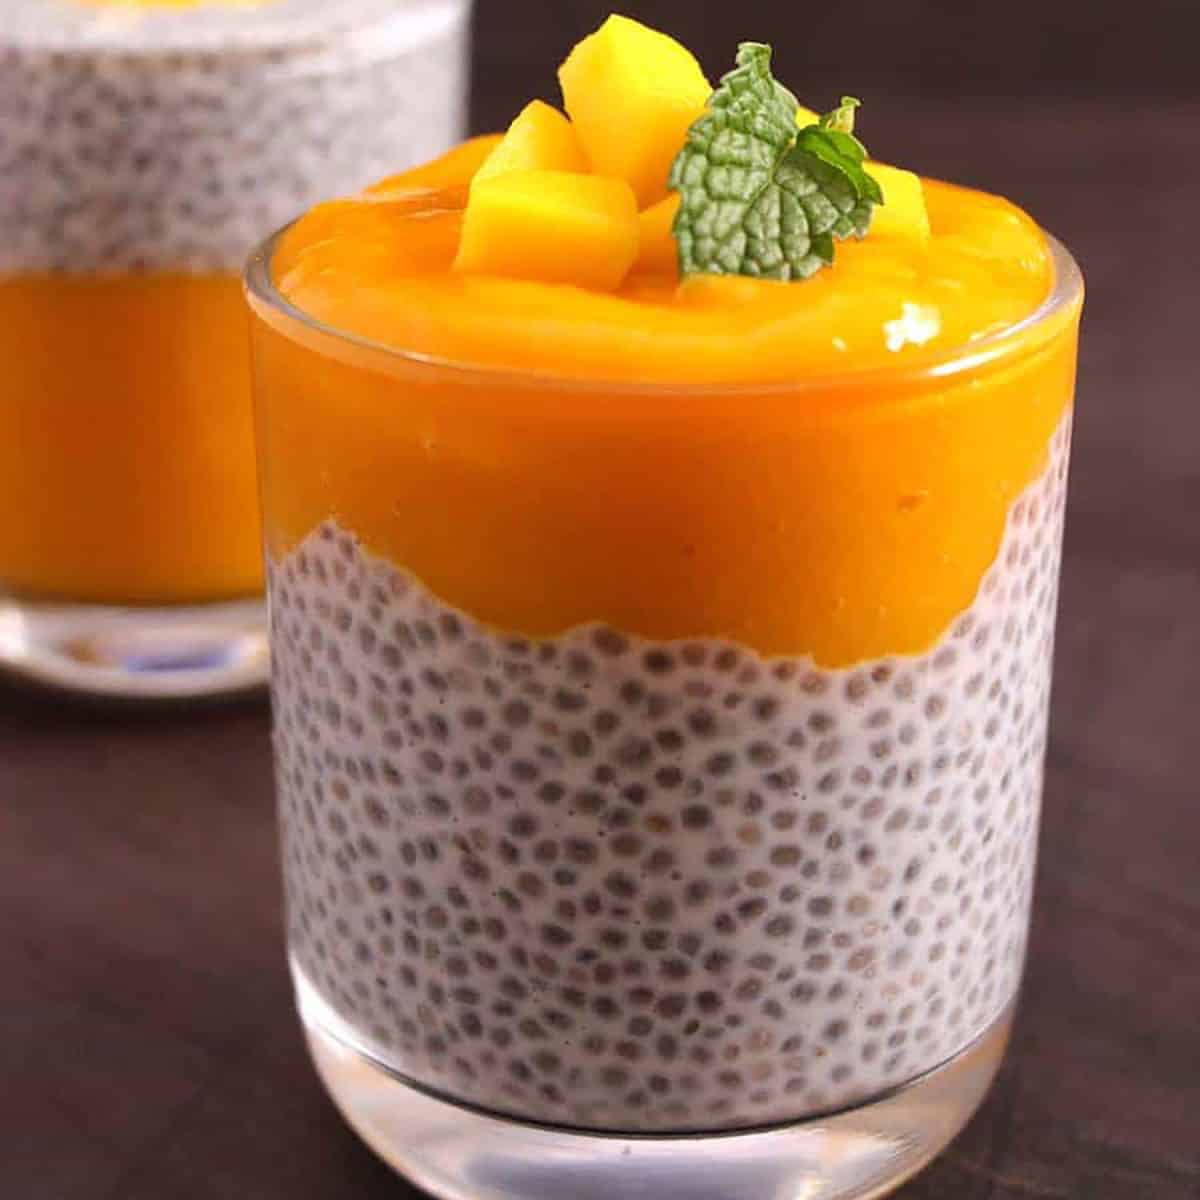 Overnight mango chia pudding in a serving glass garnished with mango chunks & mint leaves